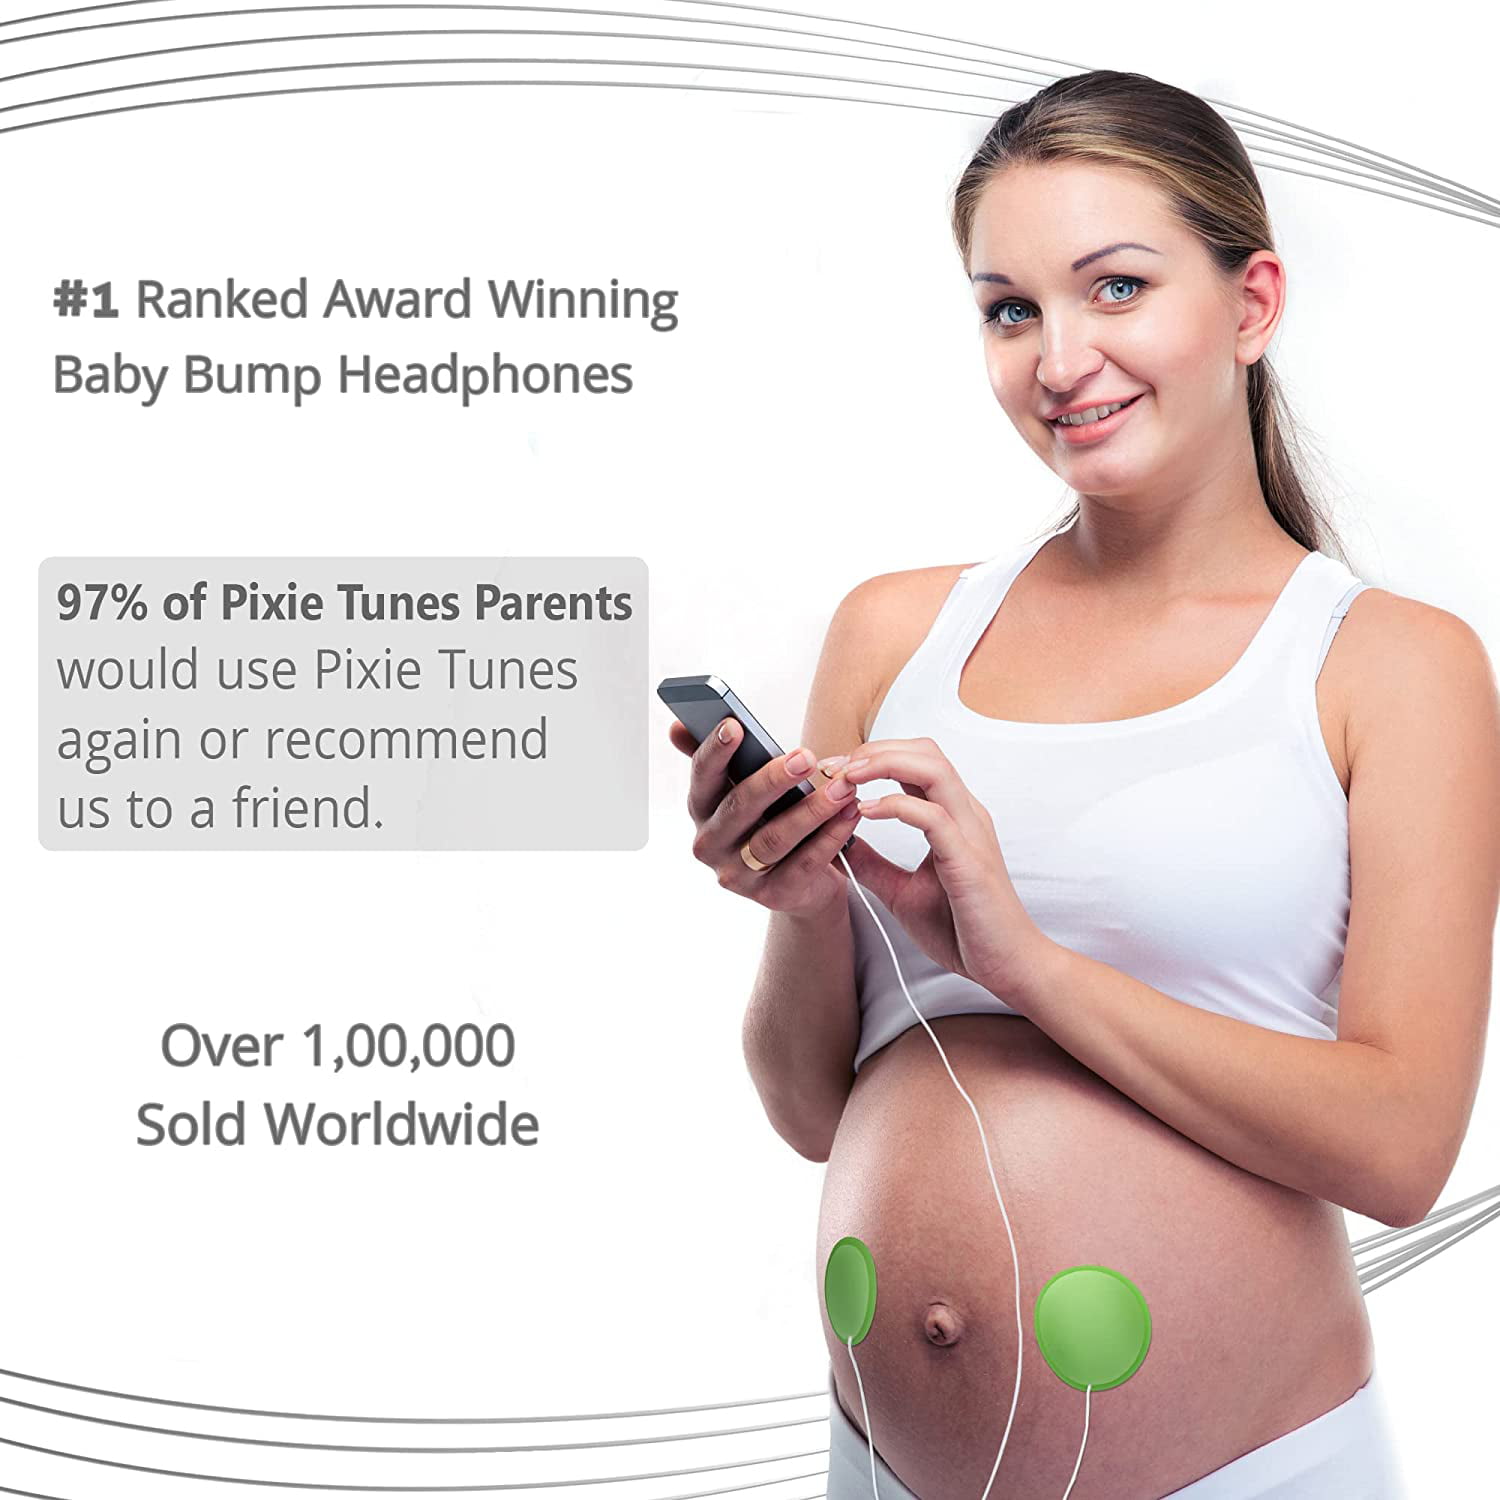 Pixie Tunes Premium Baby Bump Speaker System to Play Sound, Music and Talk to Your Baby in The Womb, White with Green Ring